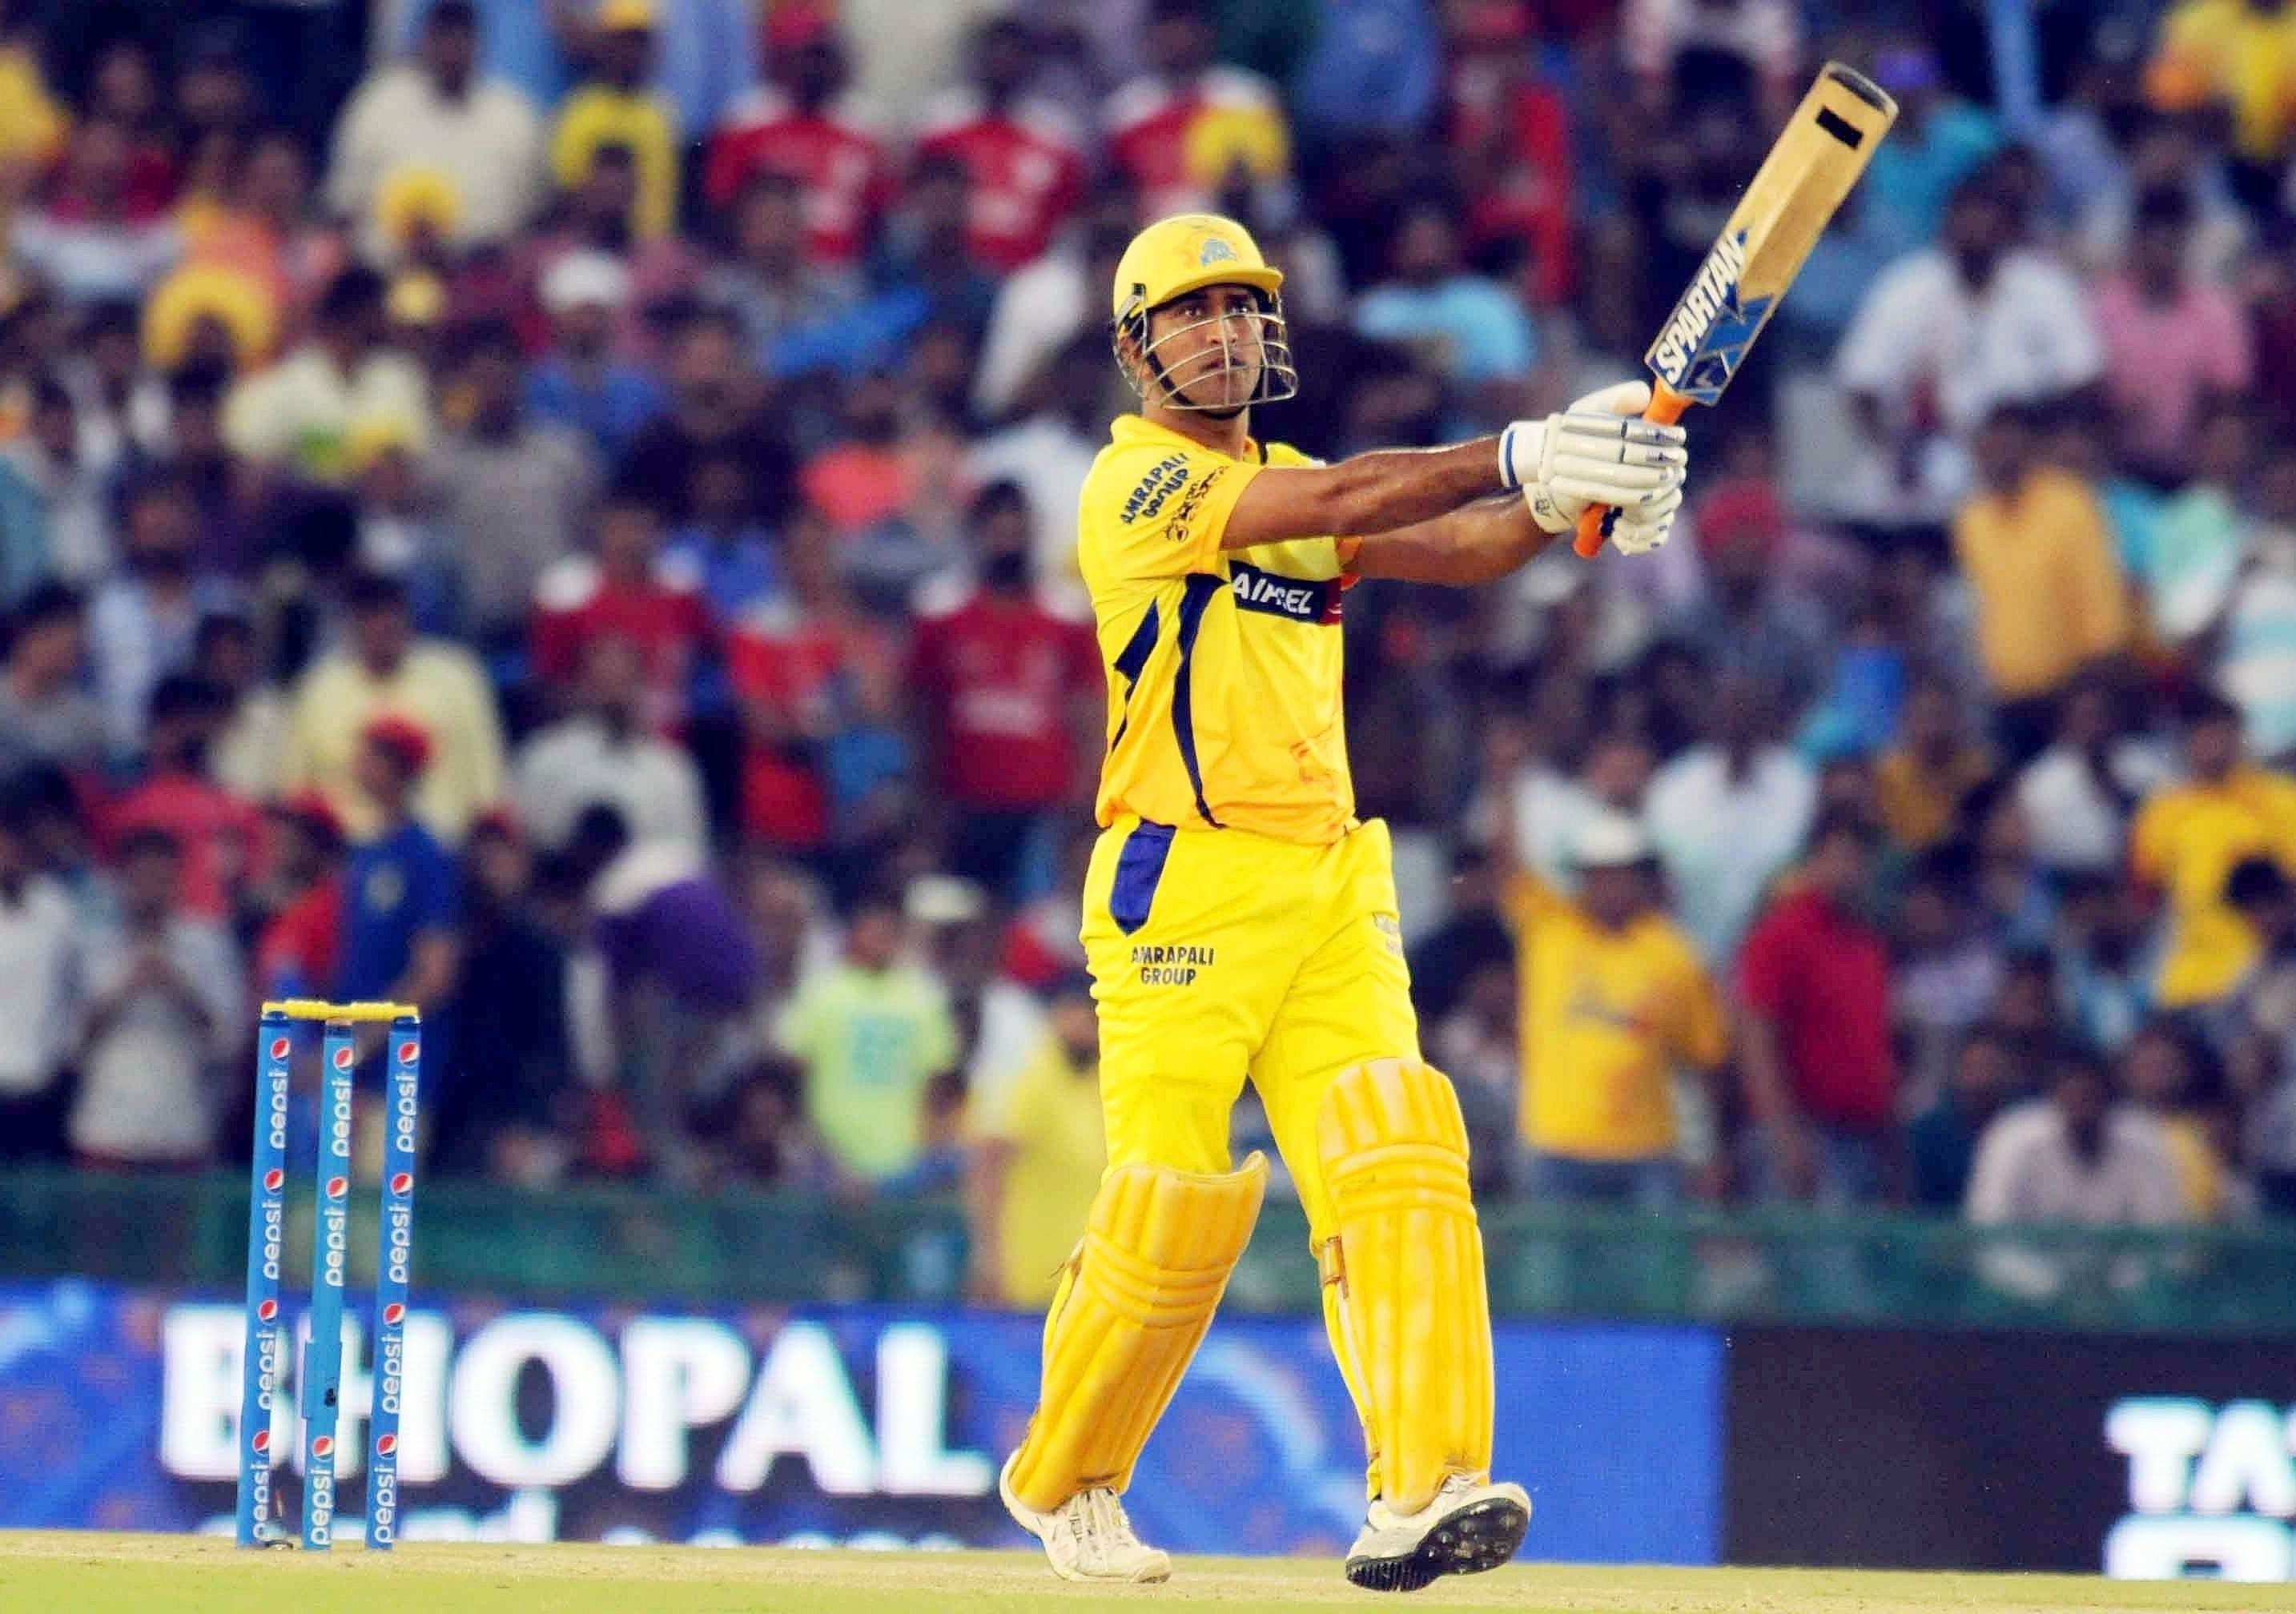 500 Dhoni Csk Wallpapers  Background Beautiful Best Available For  Download Dhoni Csk Images Free On Zicxacomphotos  Zicxa Photos